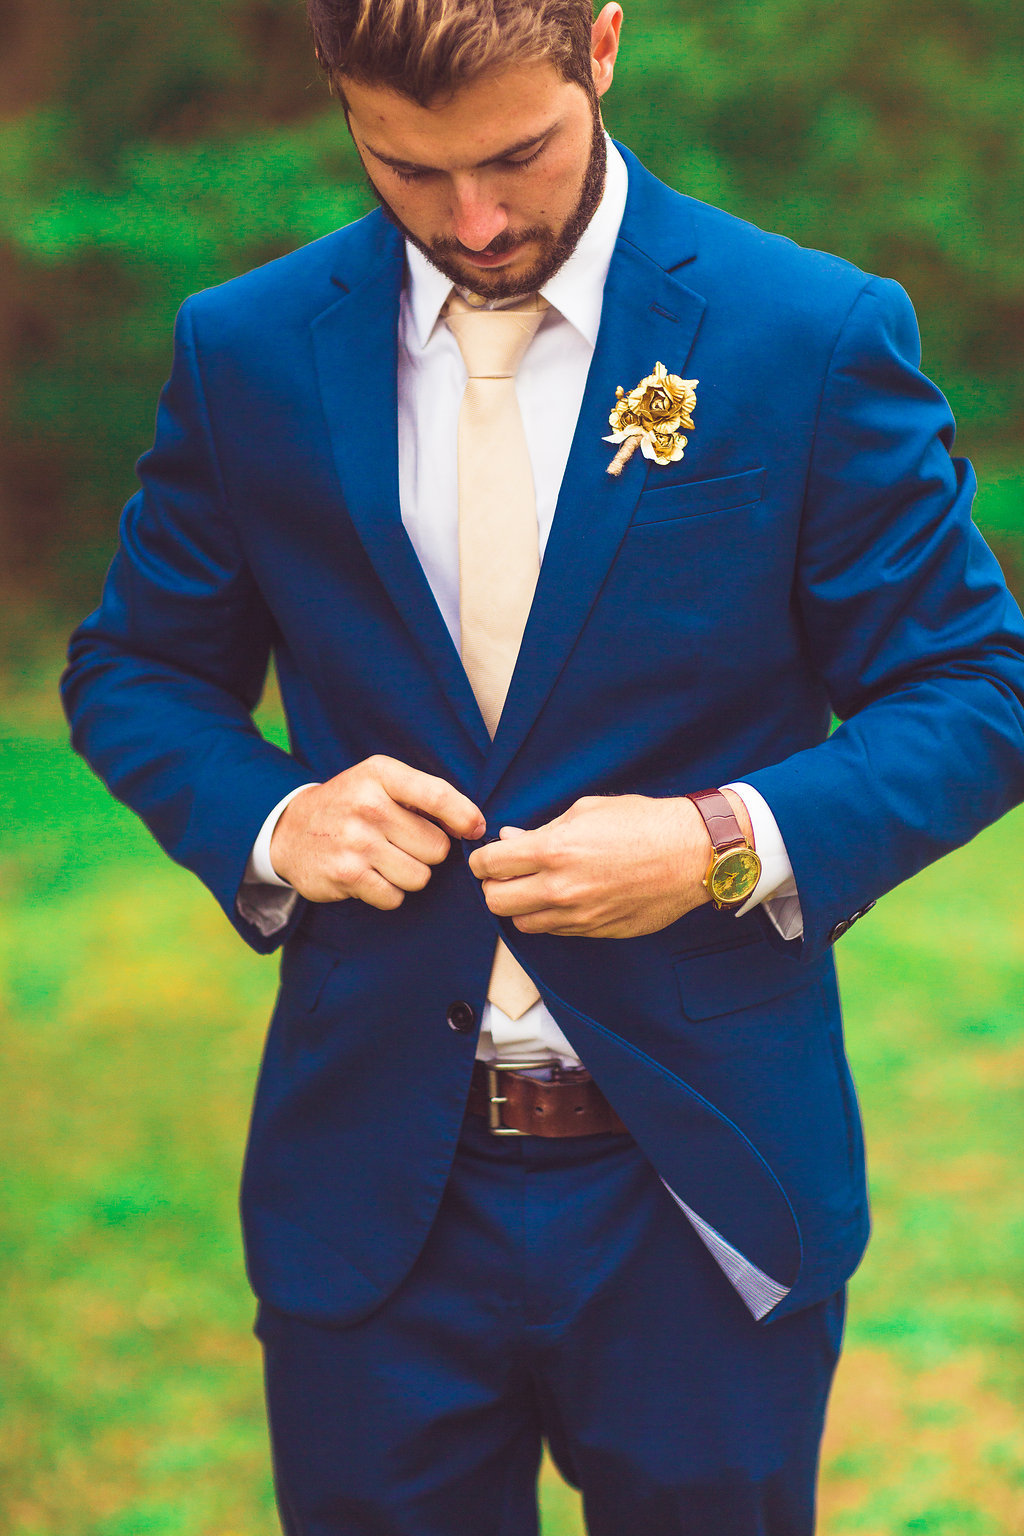 Wedding Photograph Of Man Buttoning His Blue Suit Los Angeles